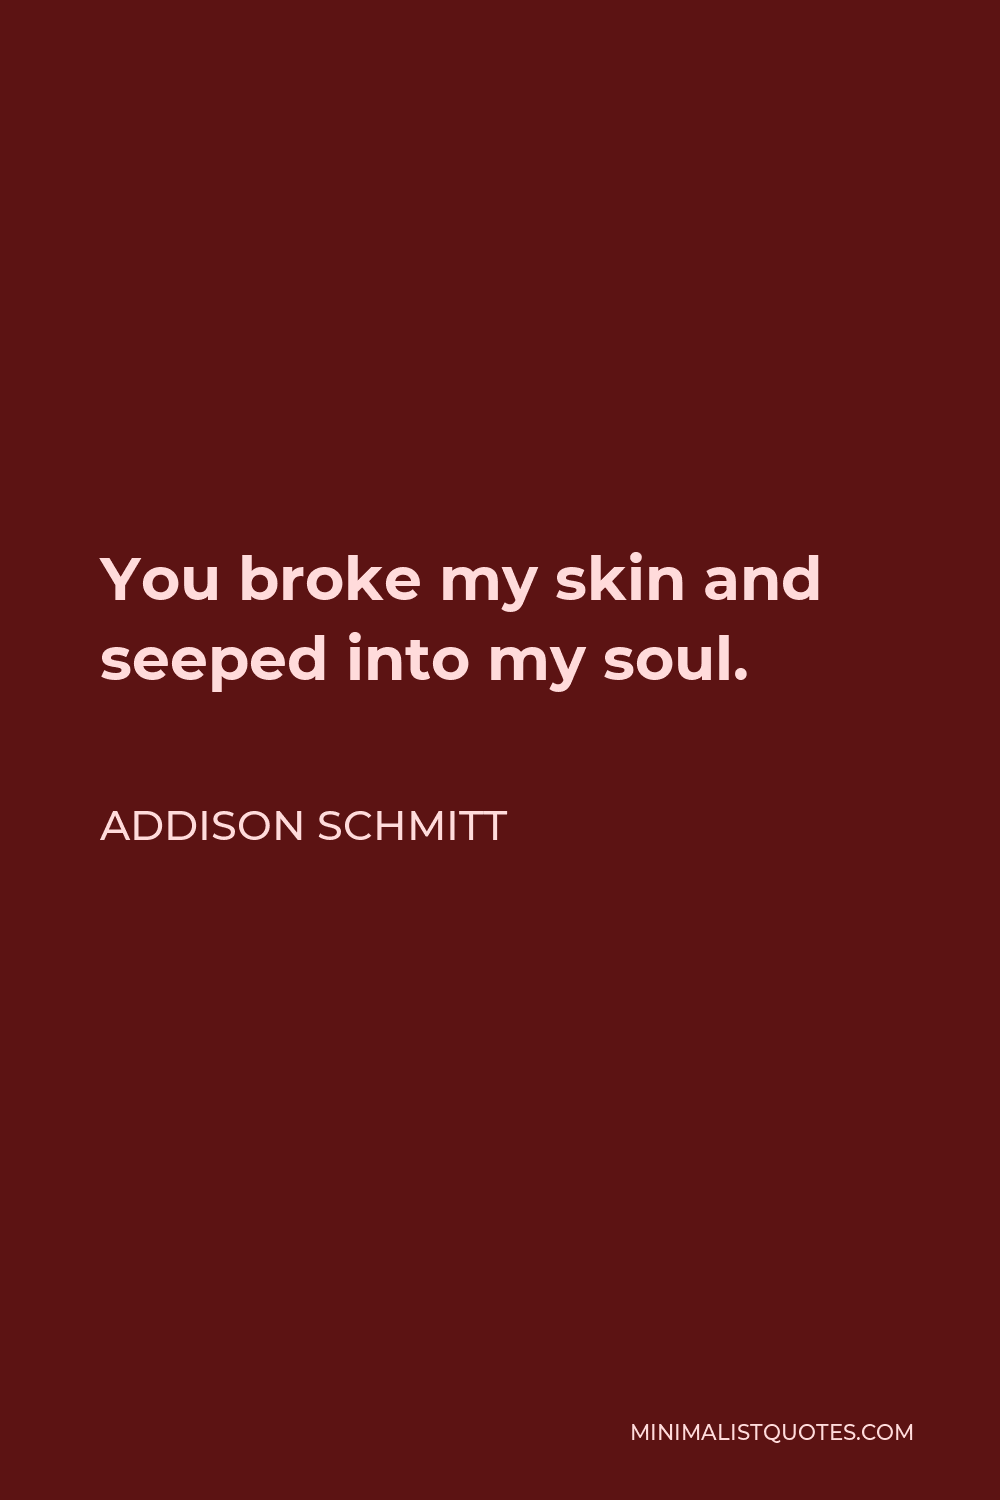 Addison Schmitt Quote - You broke my skin and seeped into my soul.